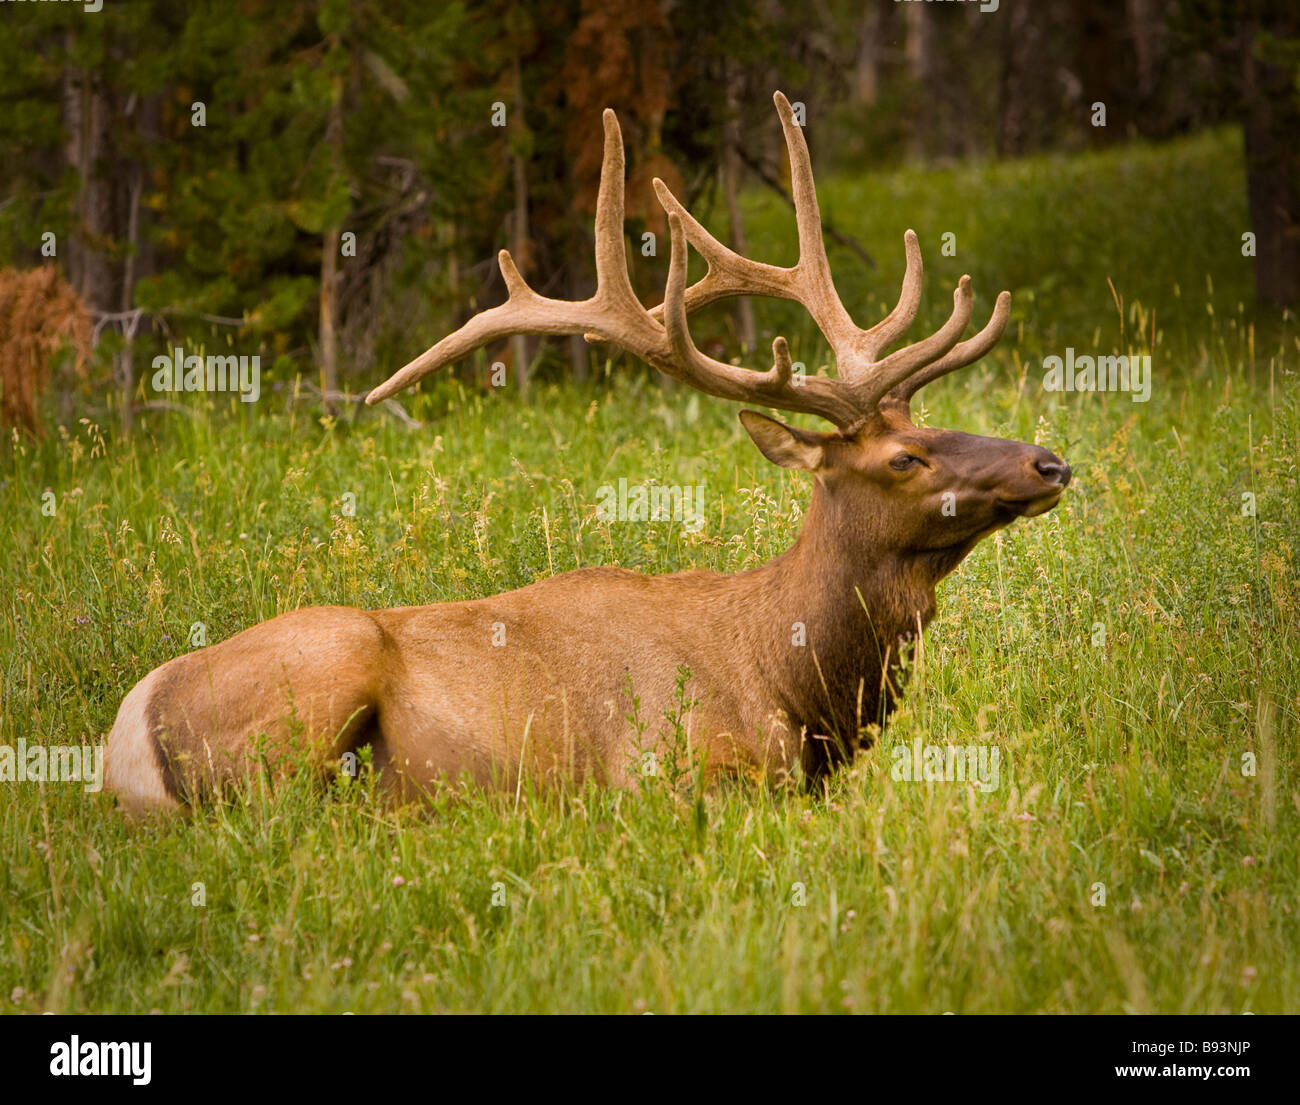 Le parc national de Yellowstone au Wyoming USA elk resting in grass Banque D'Images